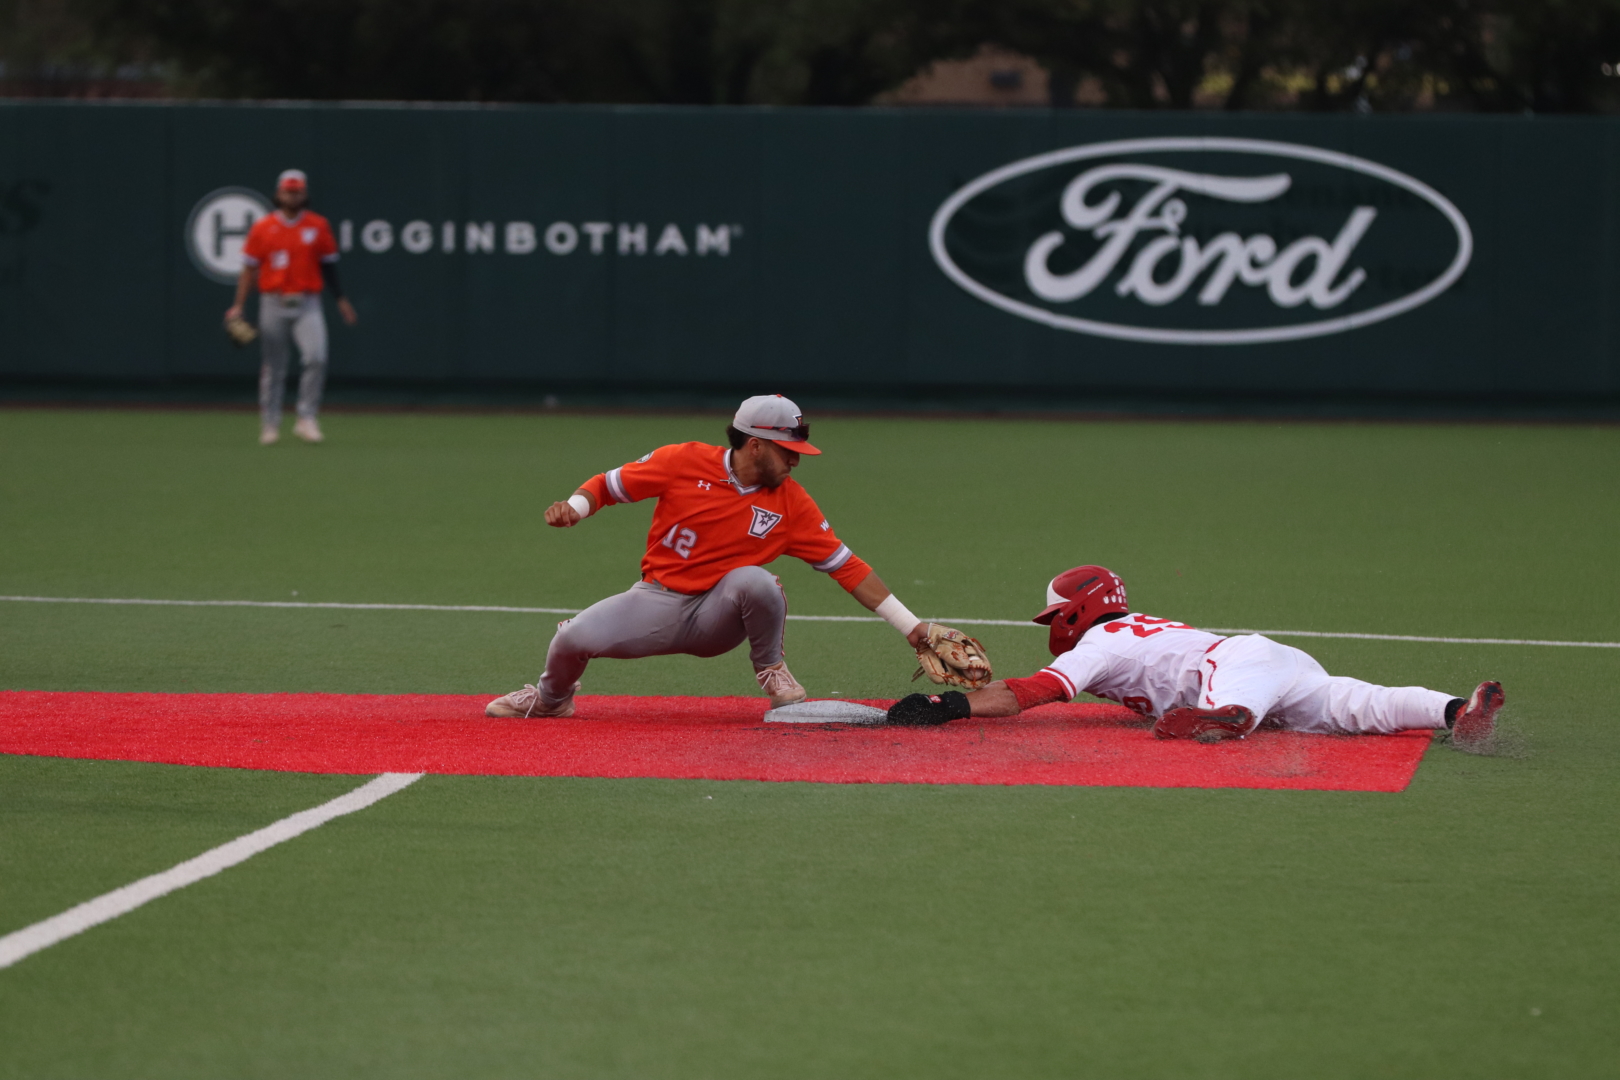 UH baseball center fielder Samuel Tormos was caught stealing after he slid past the bag in the first inning of the Cougars' loss to UTRGV on Tuesday night. | James Mueller/The Cougar